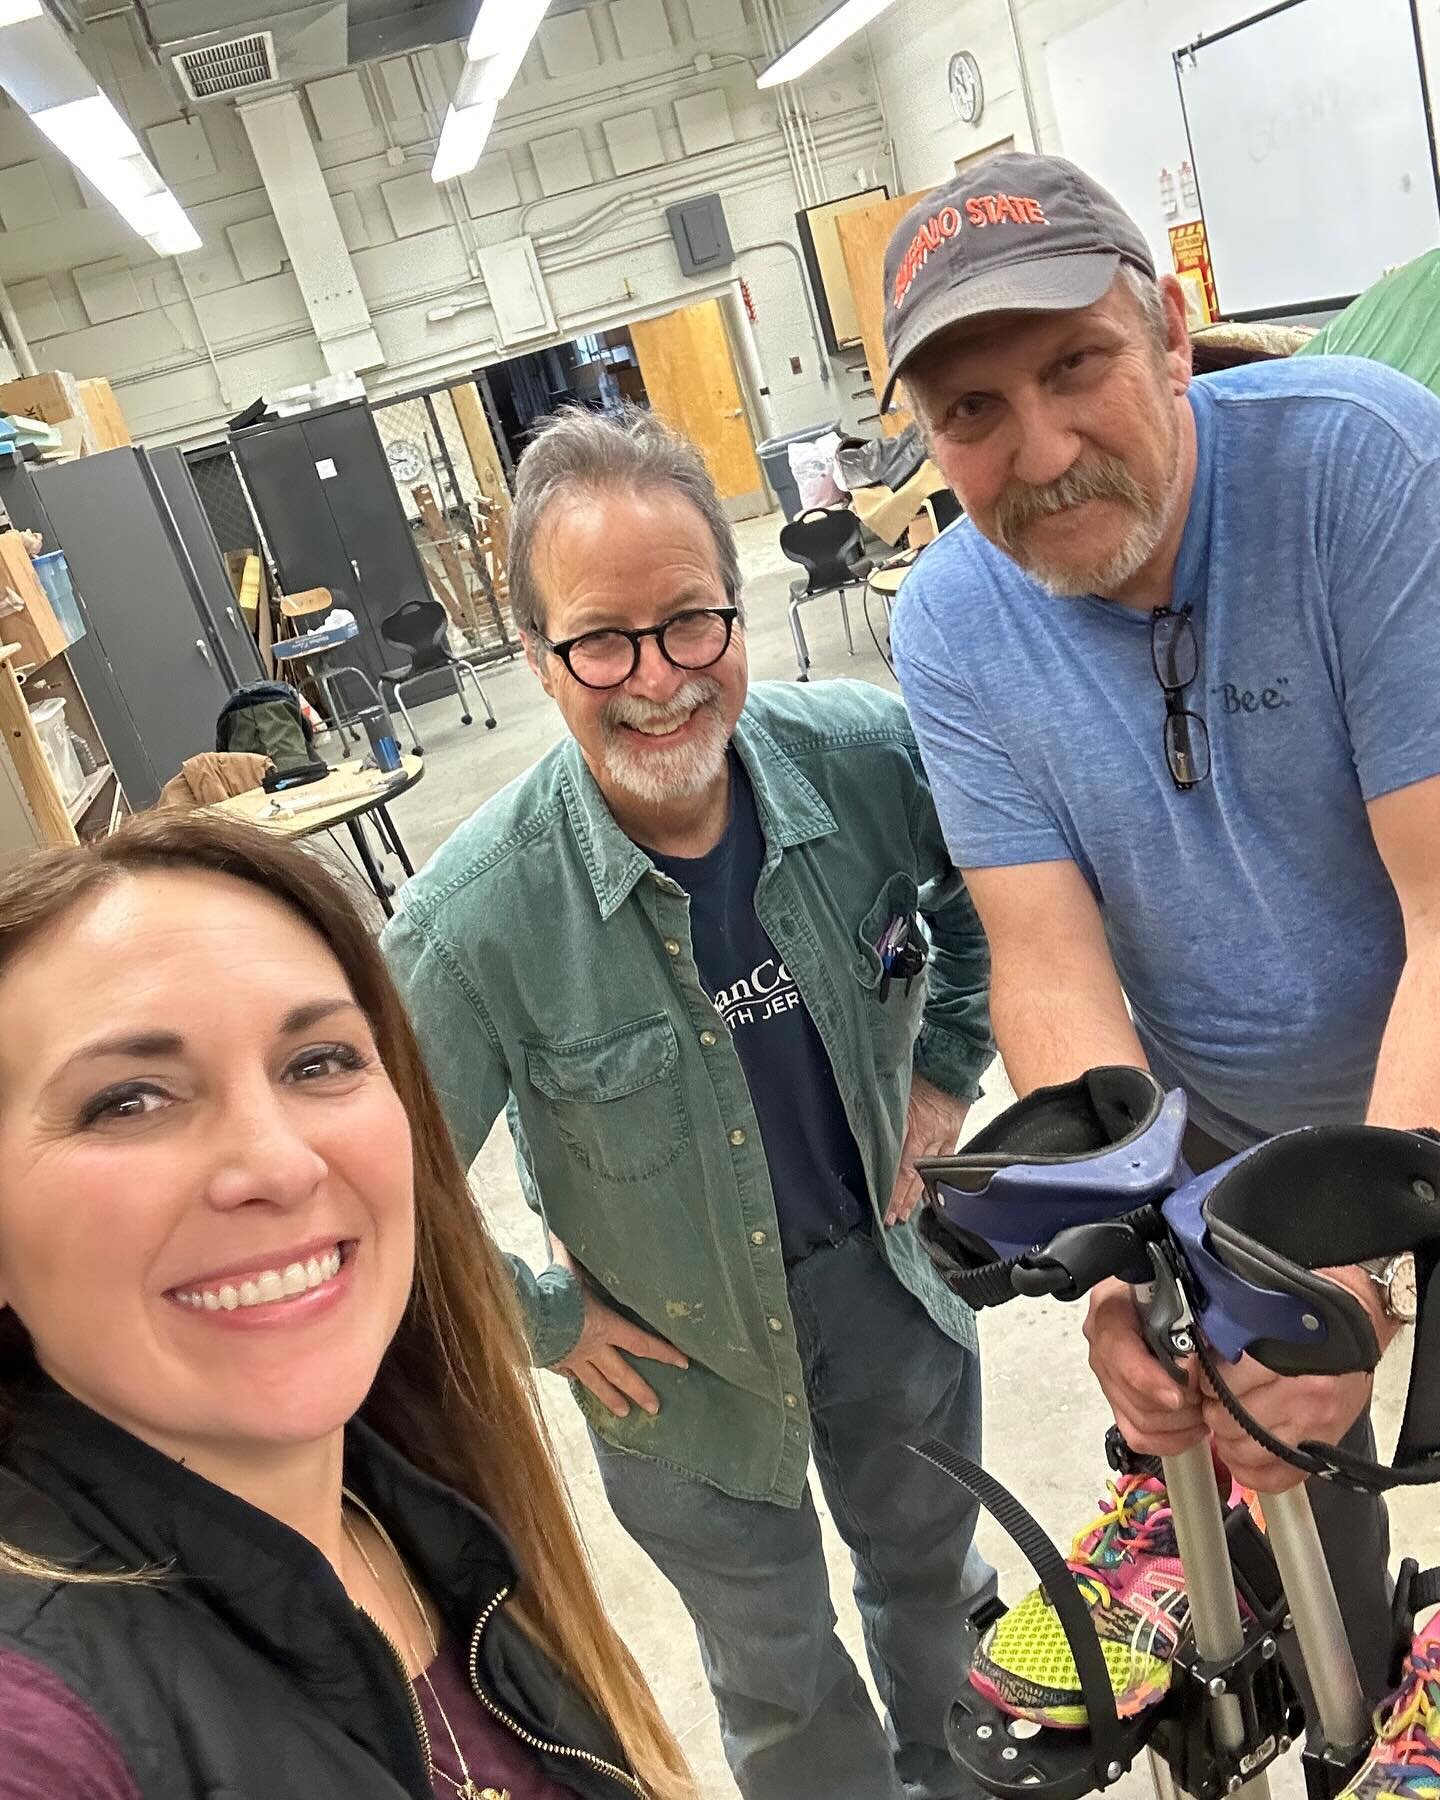 When you stop by your old art department @rowanuart to visit and get a new pair of stilts shaped up! Faculty member Jim Greenwell bolted my sneakers on my first two pairs of stilts years ago. It would only be fitting for him to do the same for my new